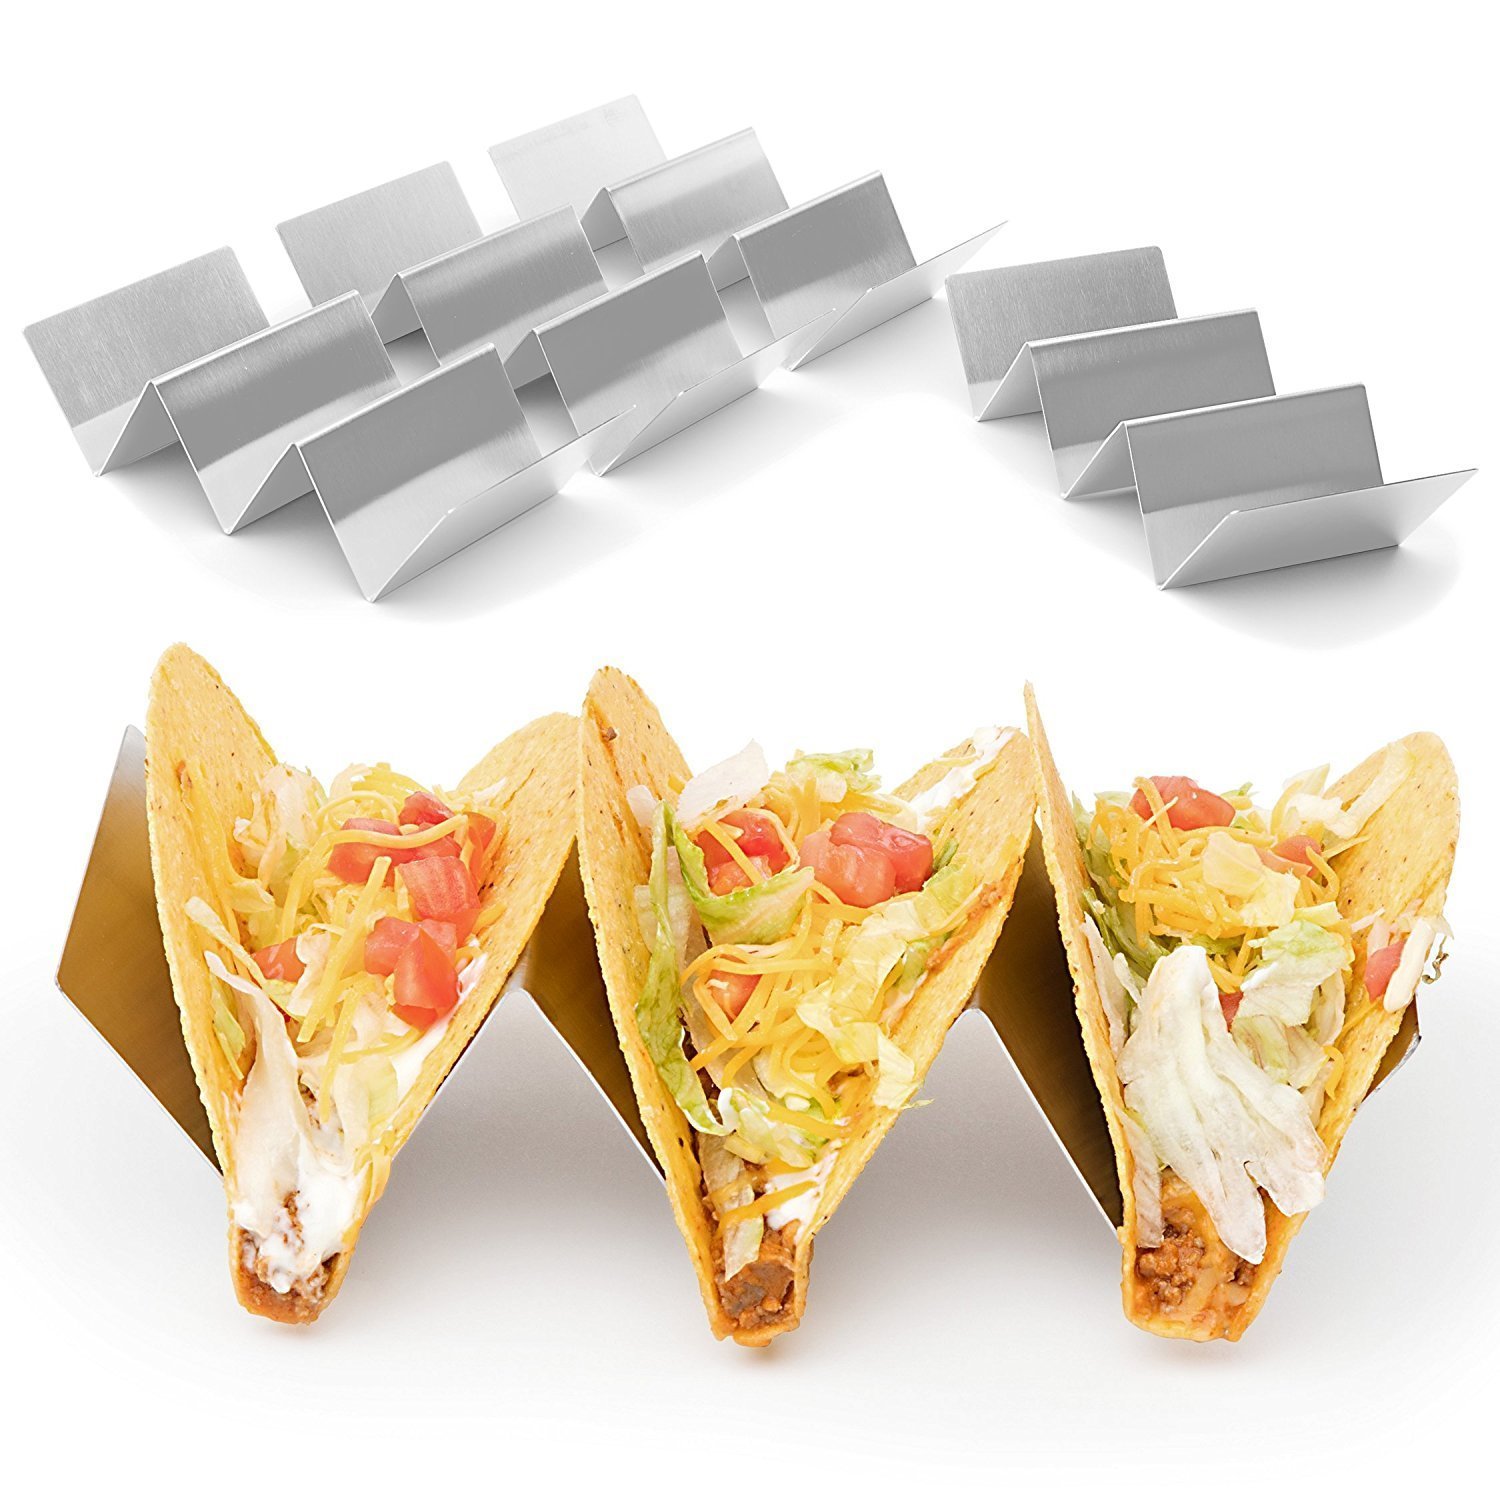 Stainless Steel Taco Holder Stand Wave Shaped Rack For Hard Shells Taco  Restaurant Grade Quality Taco Kitchen Accessories - AliExpress